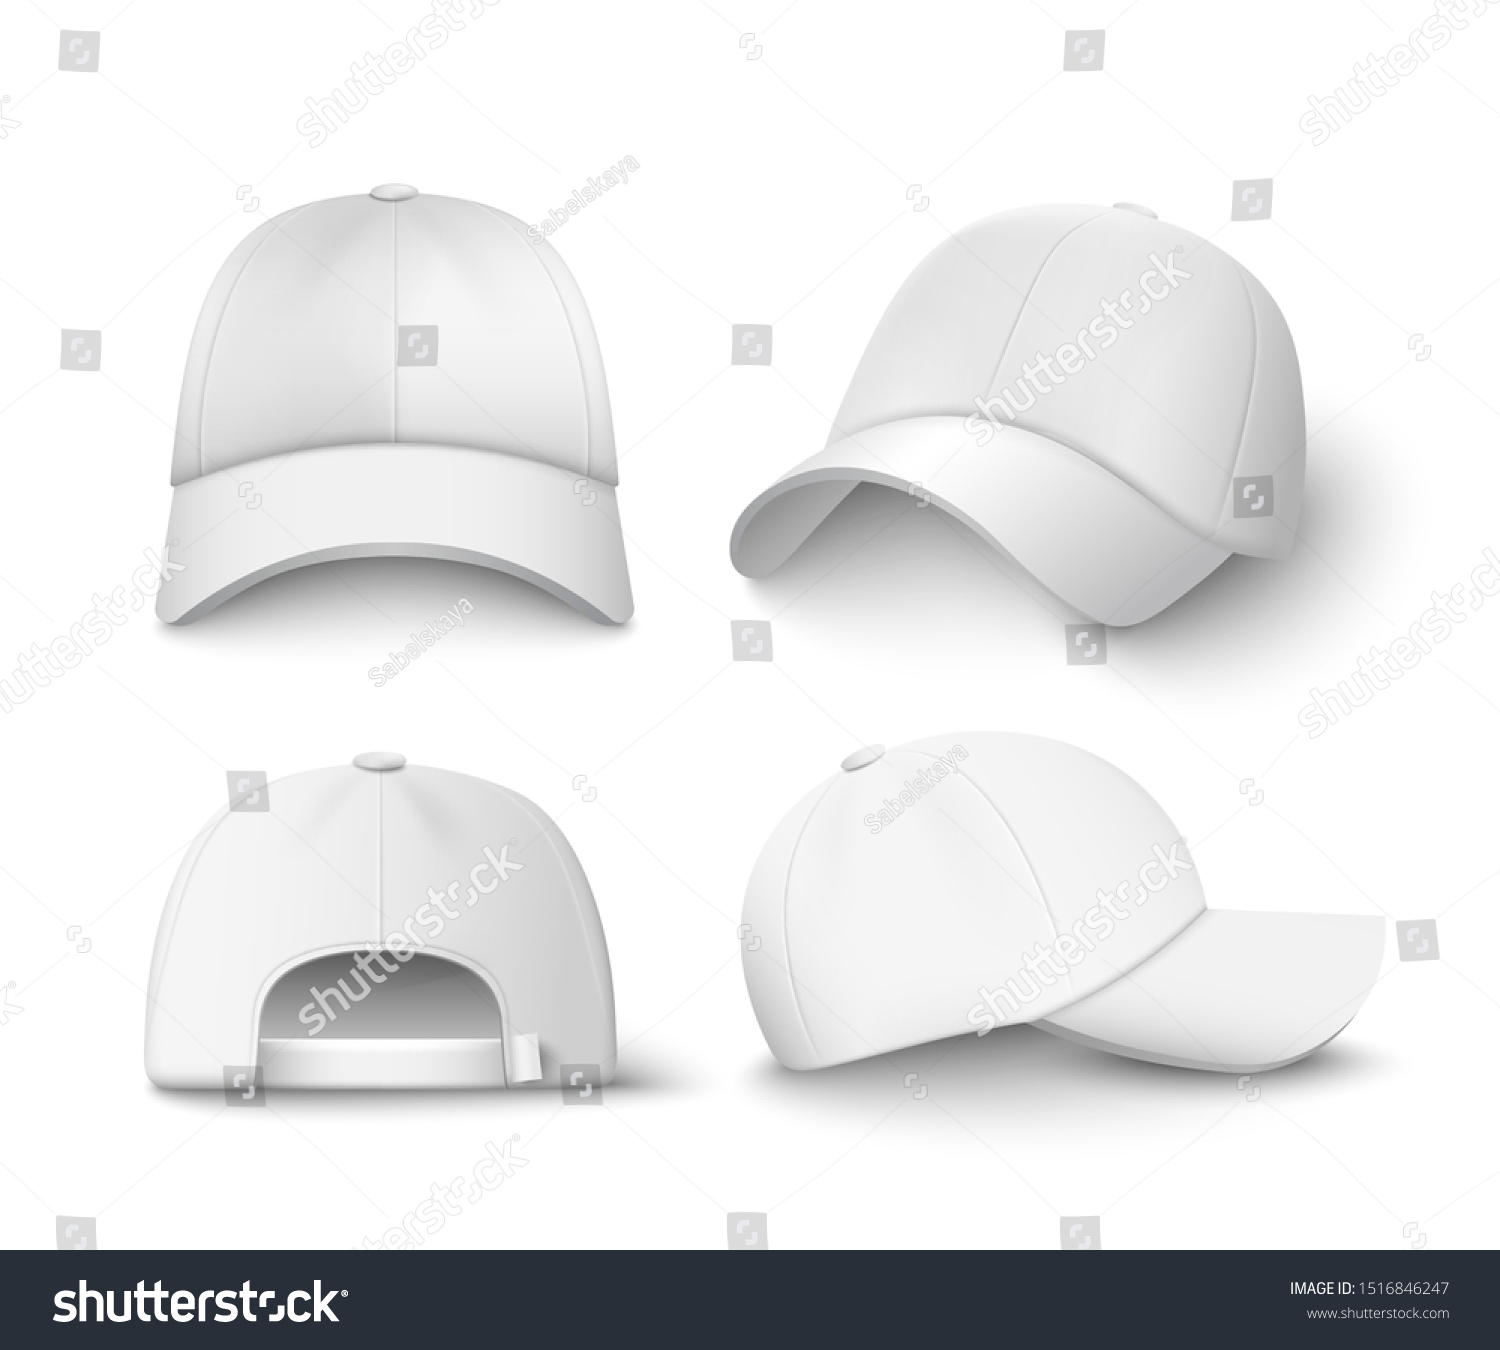 Download Get Baseball Cap Mockup Front View Background Yellowimages ...